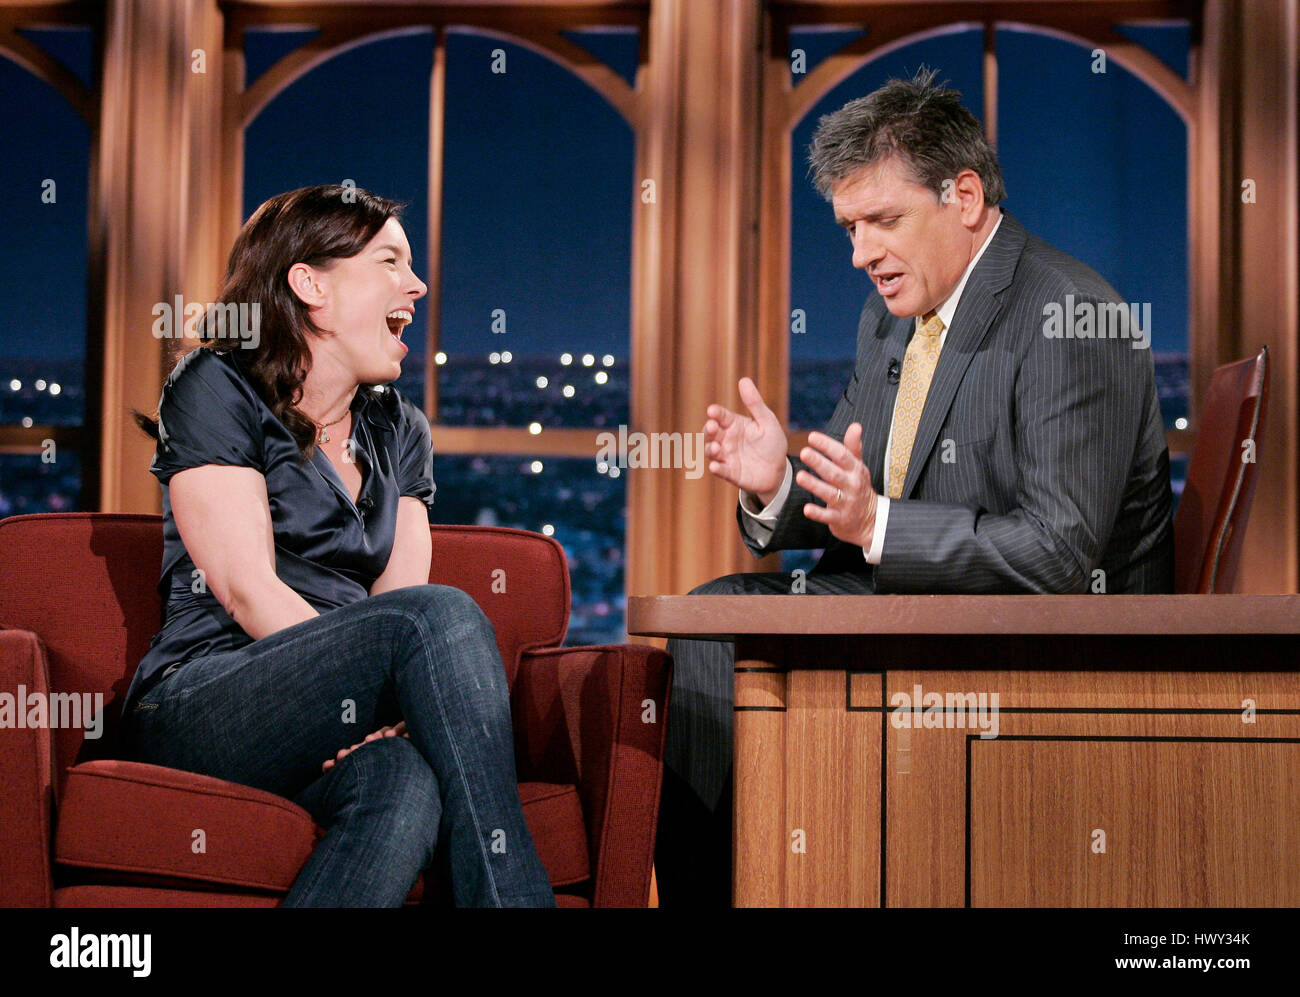 Actress Olivia Williams, left, chats with host Craig Ferguson during a segment of 'The Late Late Show with Craig Ferguson' at CBS Television City in Los Angeles, California, on Jan. 20, 2009. Photo by Francis Specker Stock Photo